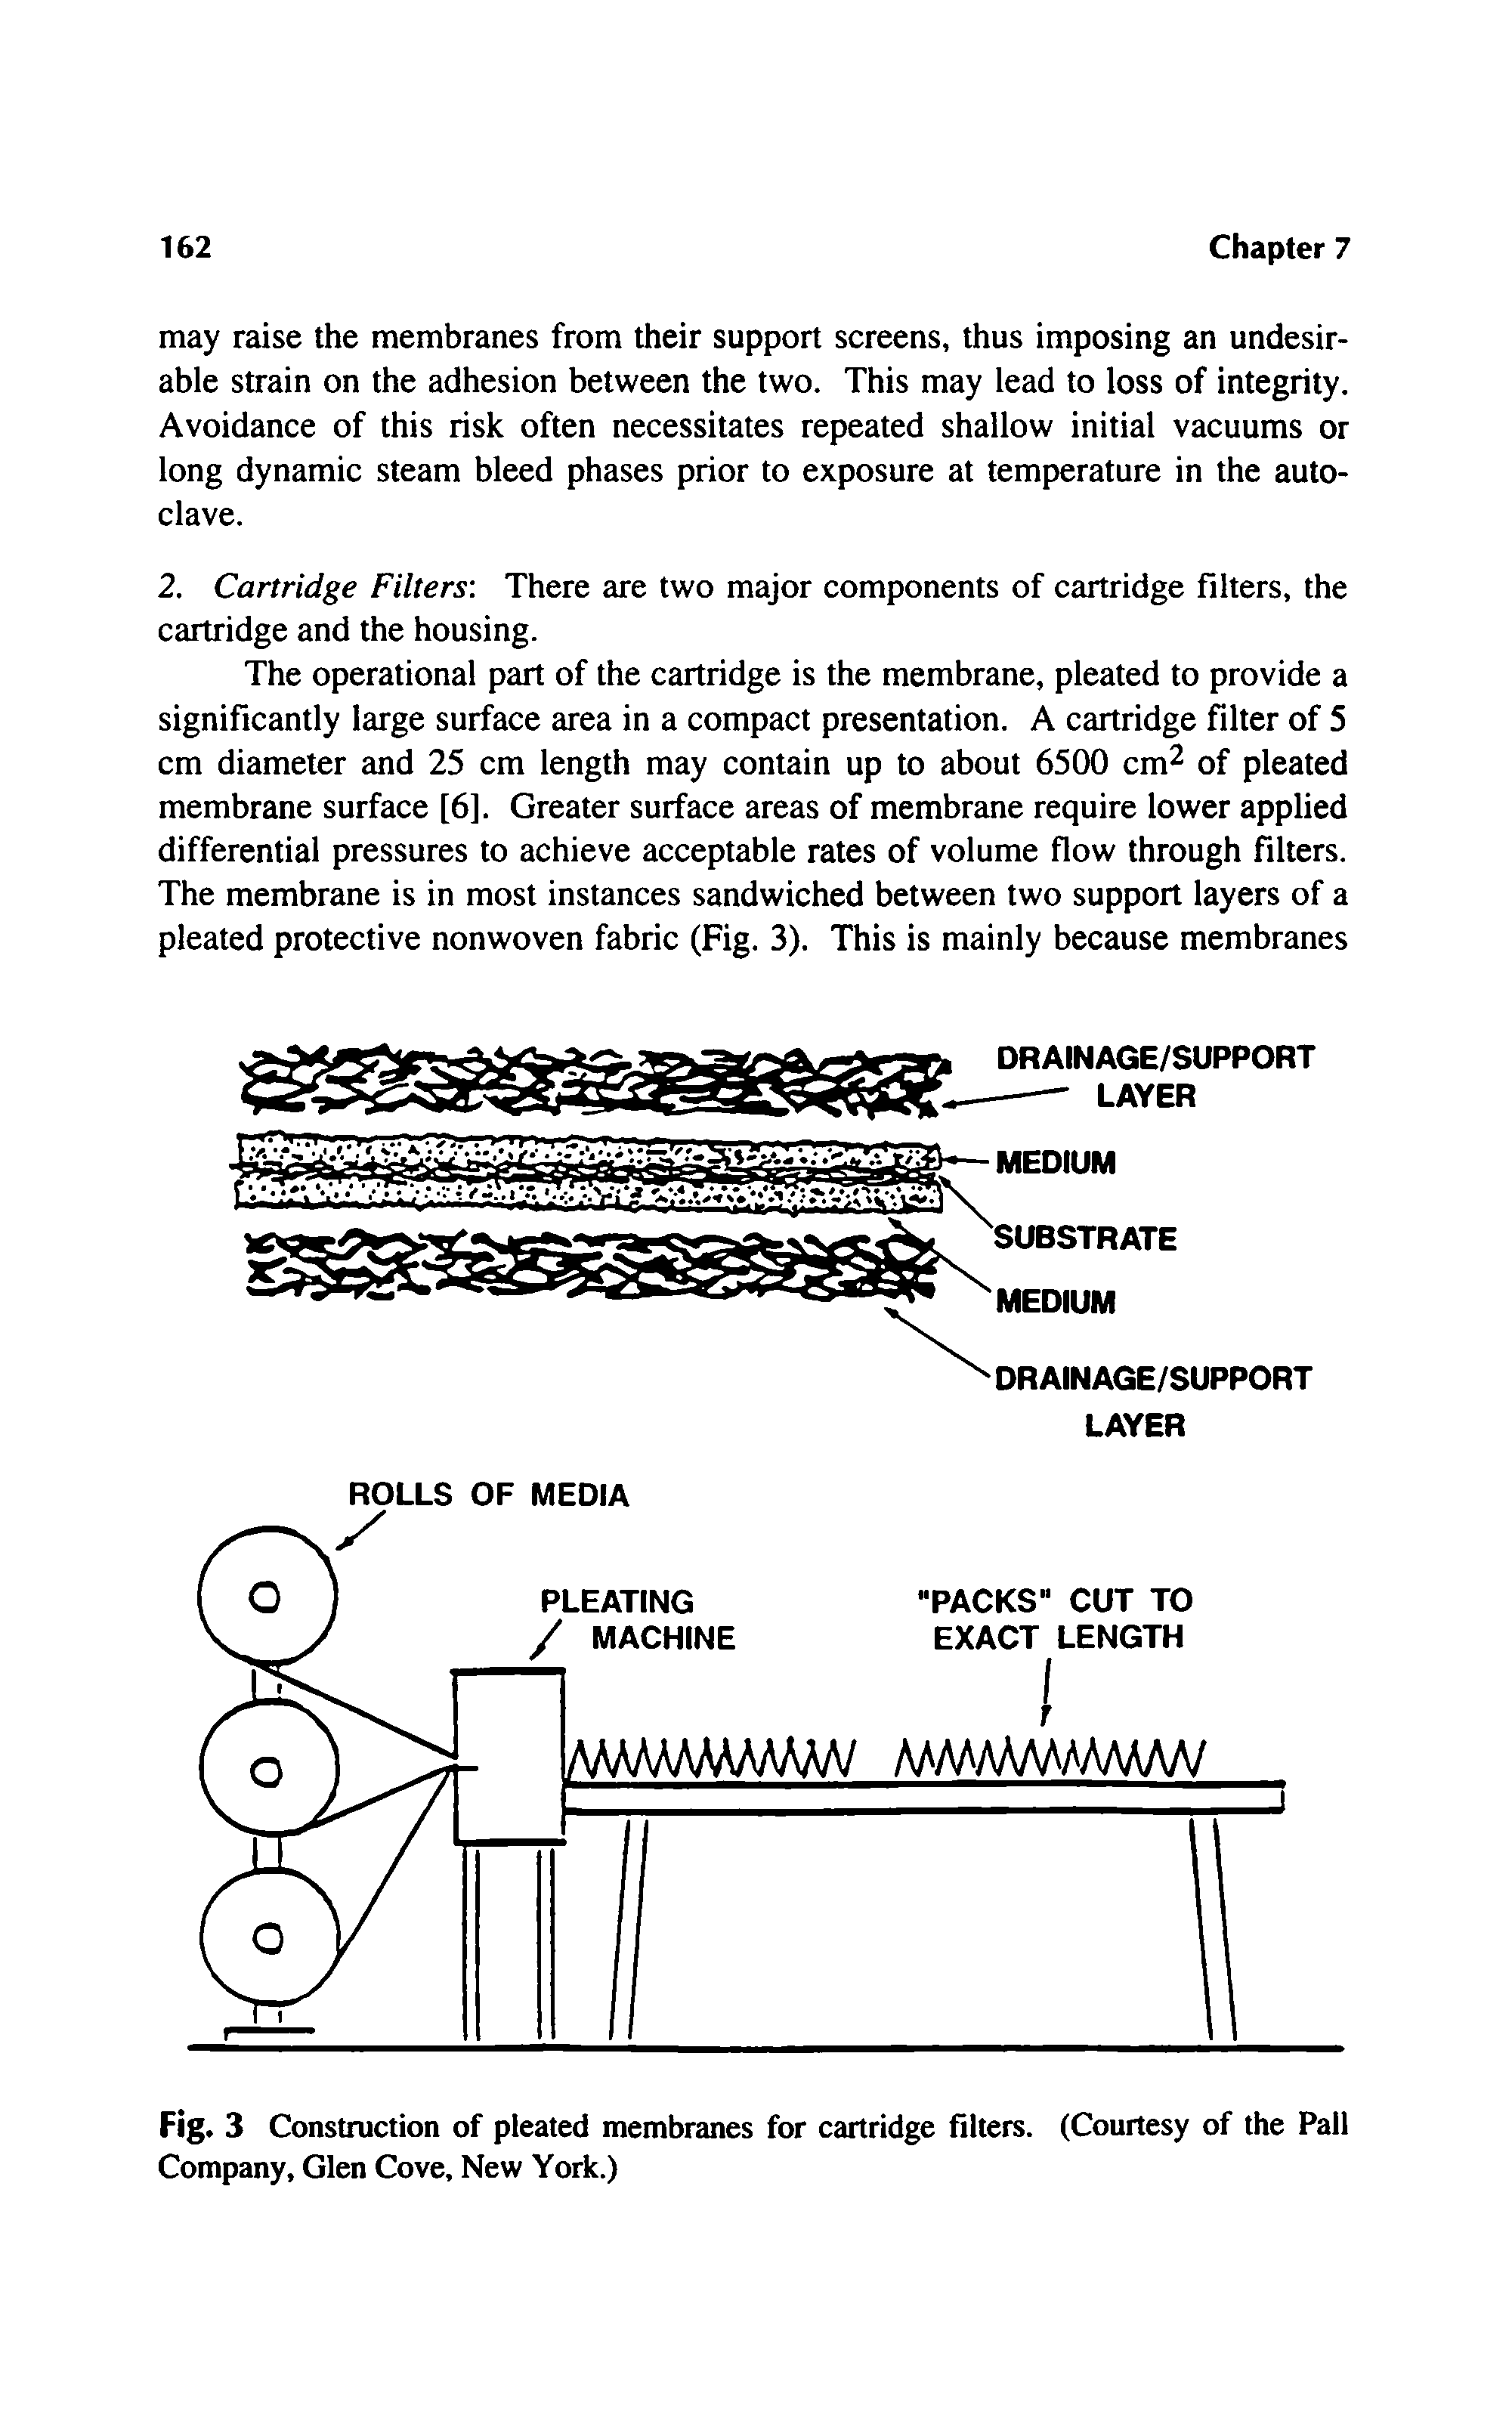 Fig. 3 Construction of pleated membranes for cartridge filters. (Courtesy of the Pall Company, Glen Cove, New York.)...